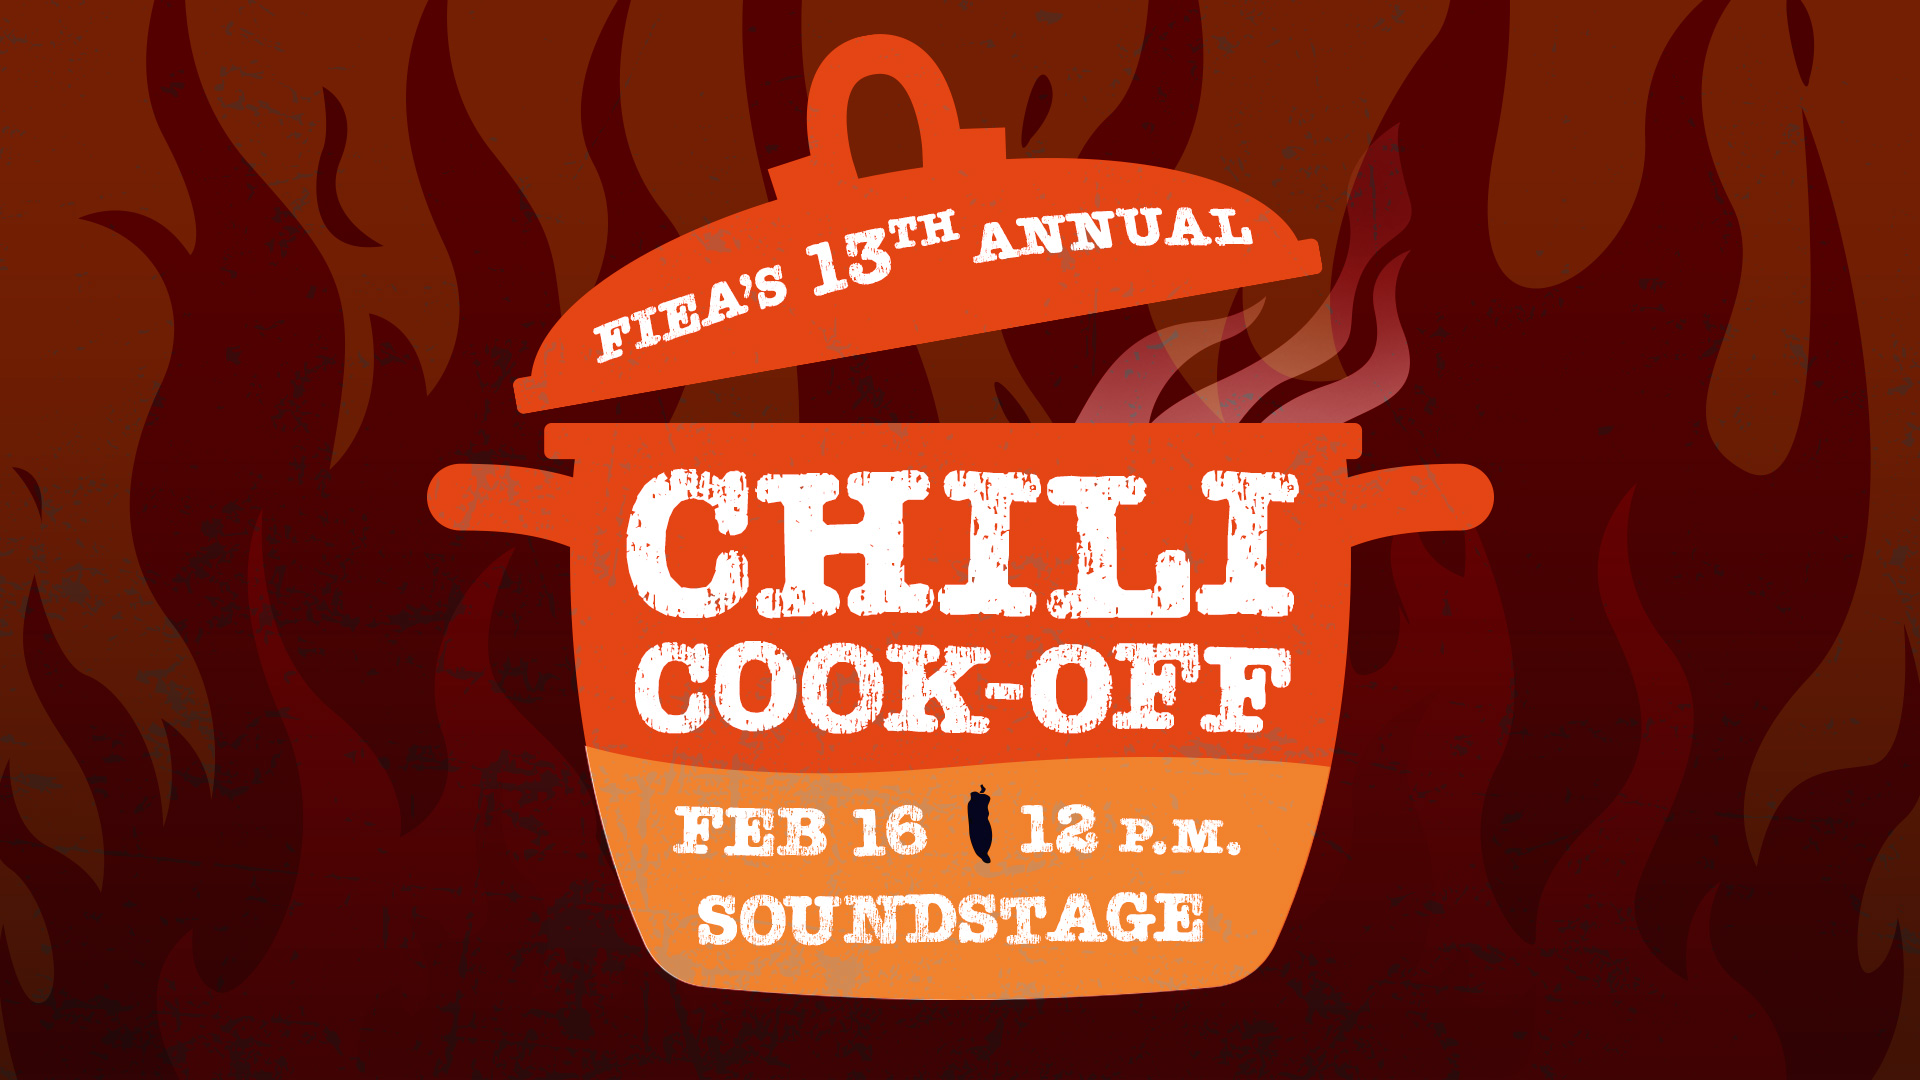 Textured fiery background with orange crockpot of steaming chili with text on top that reads FIEA's 13th Annual Chili Cook-off on February 16 at 12 p.m. in the Soundstage